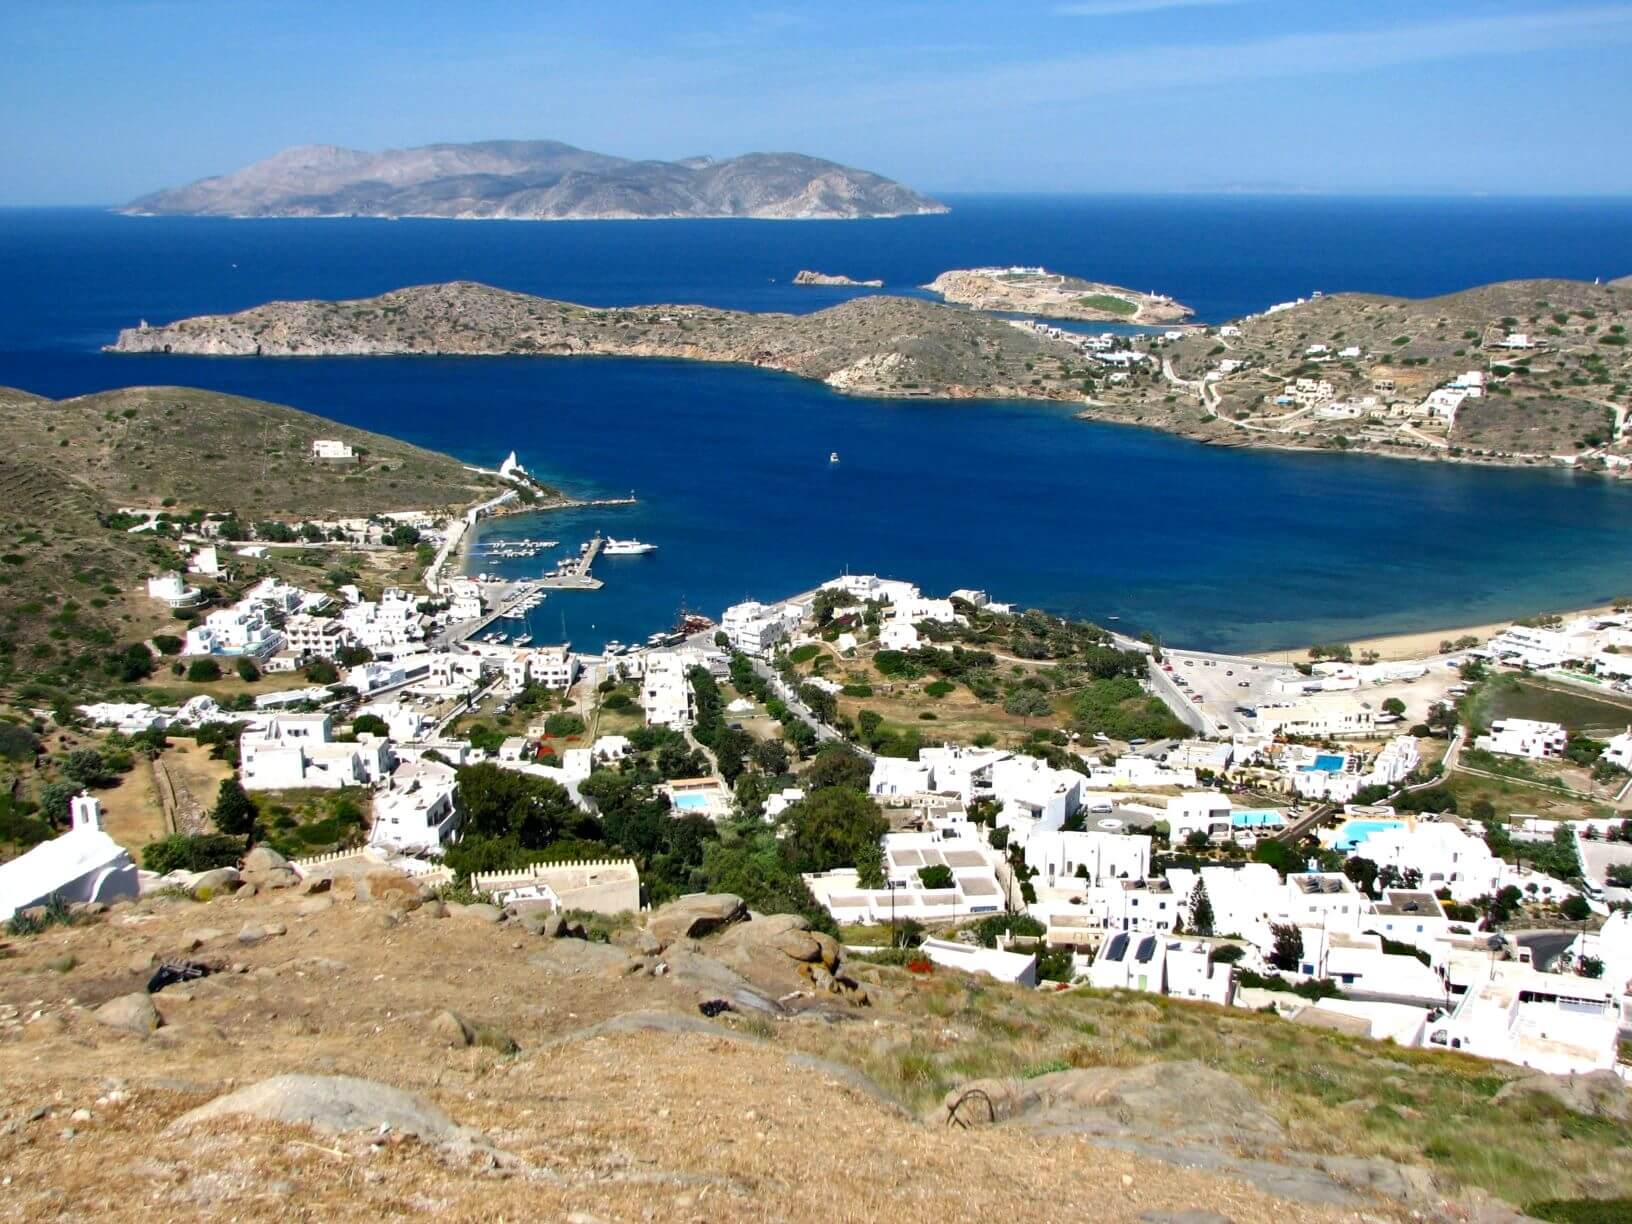 the white buildings of the island Ios, Greece and the Mediterranean in the background